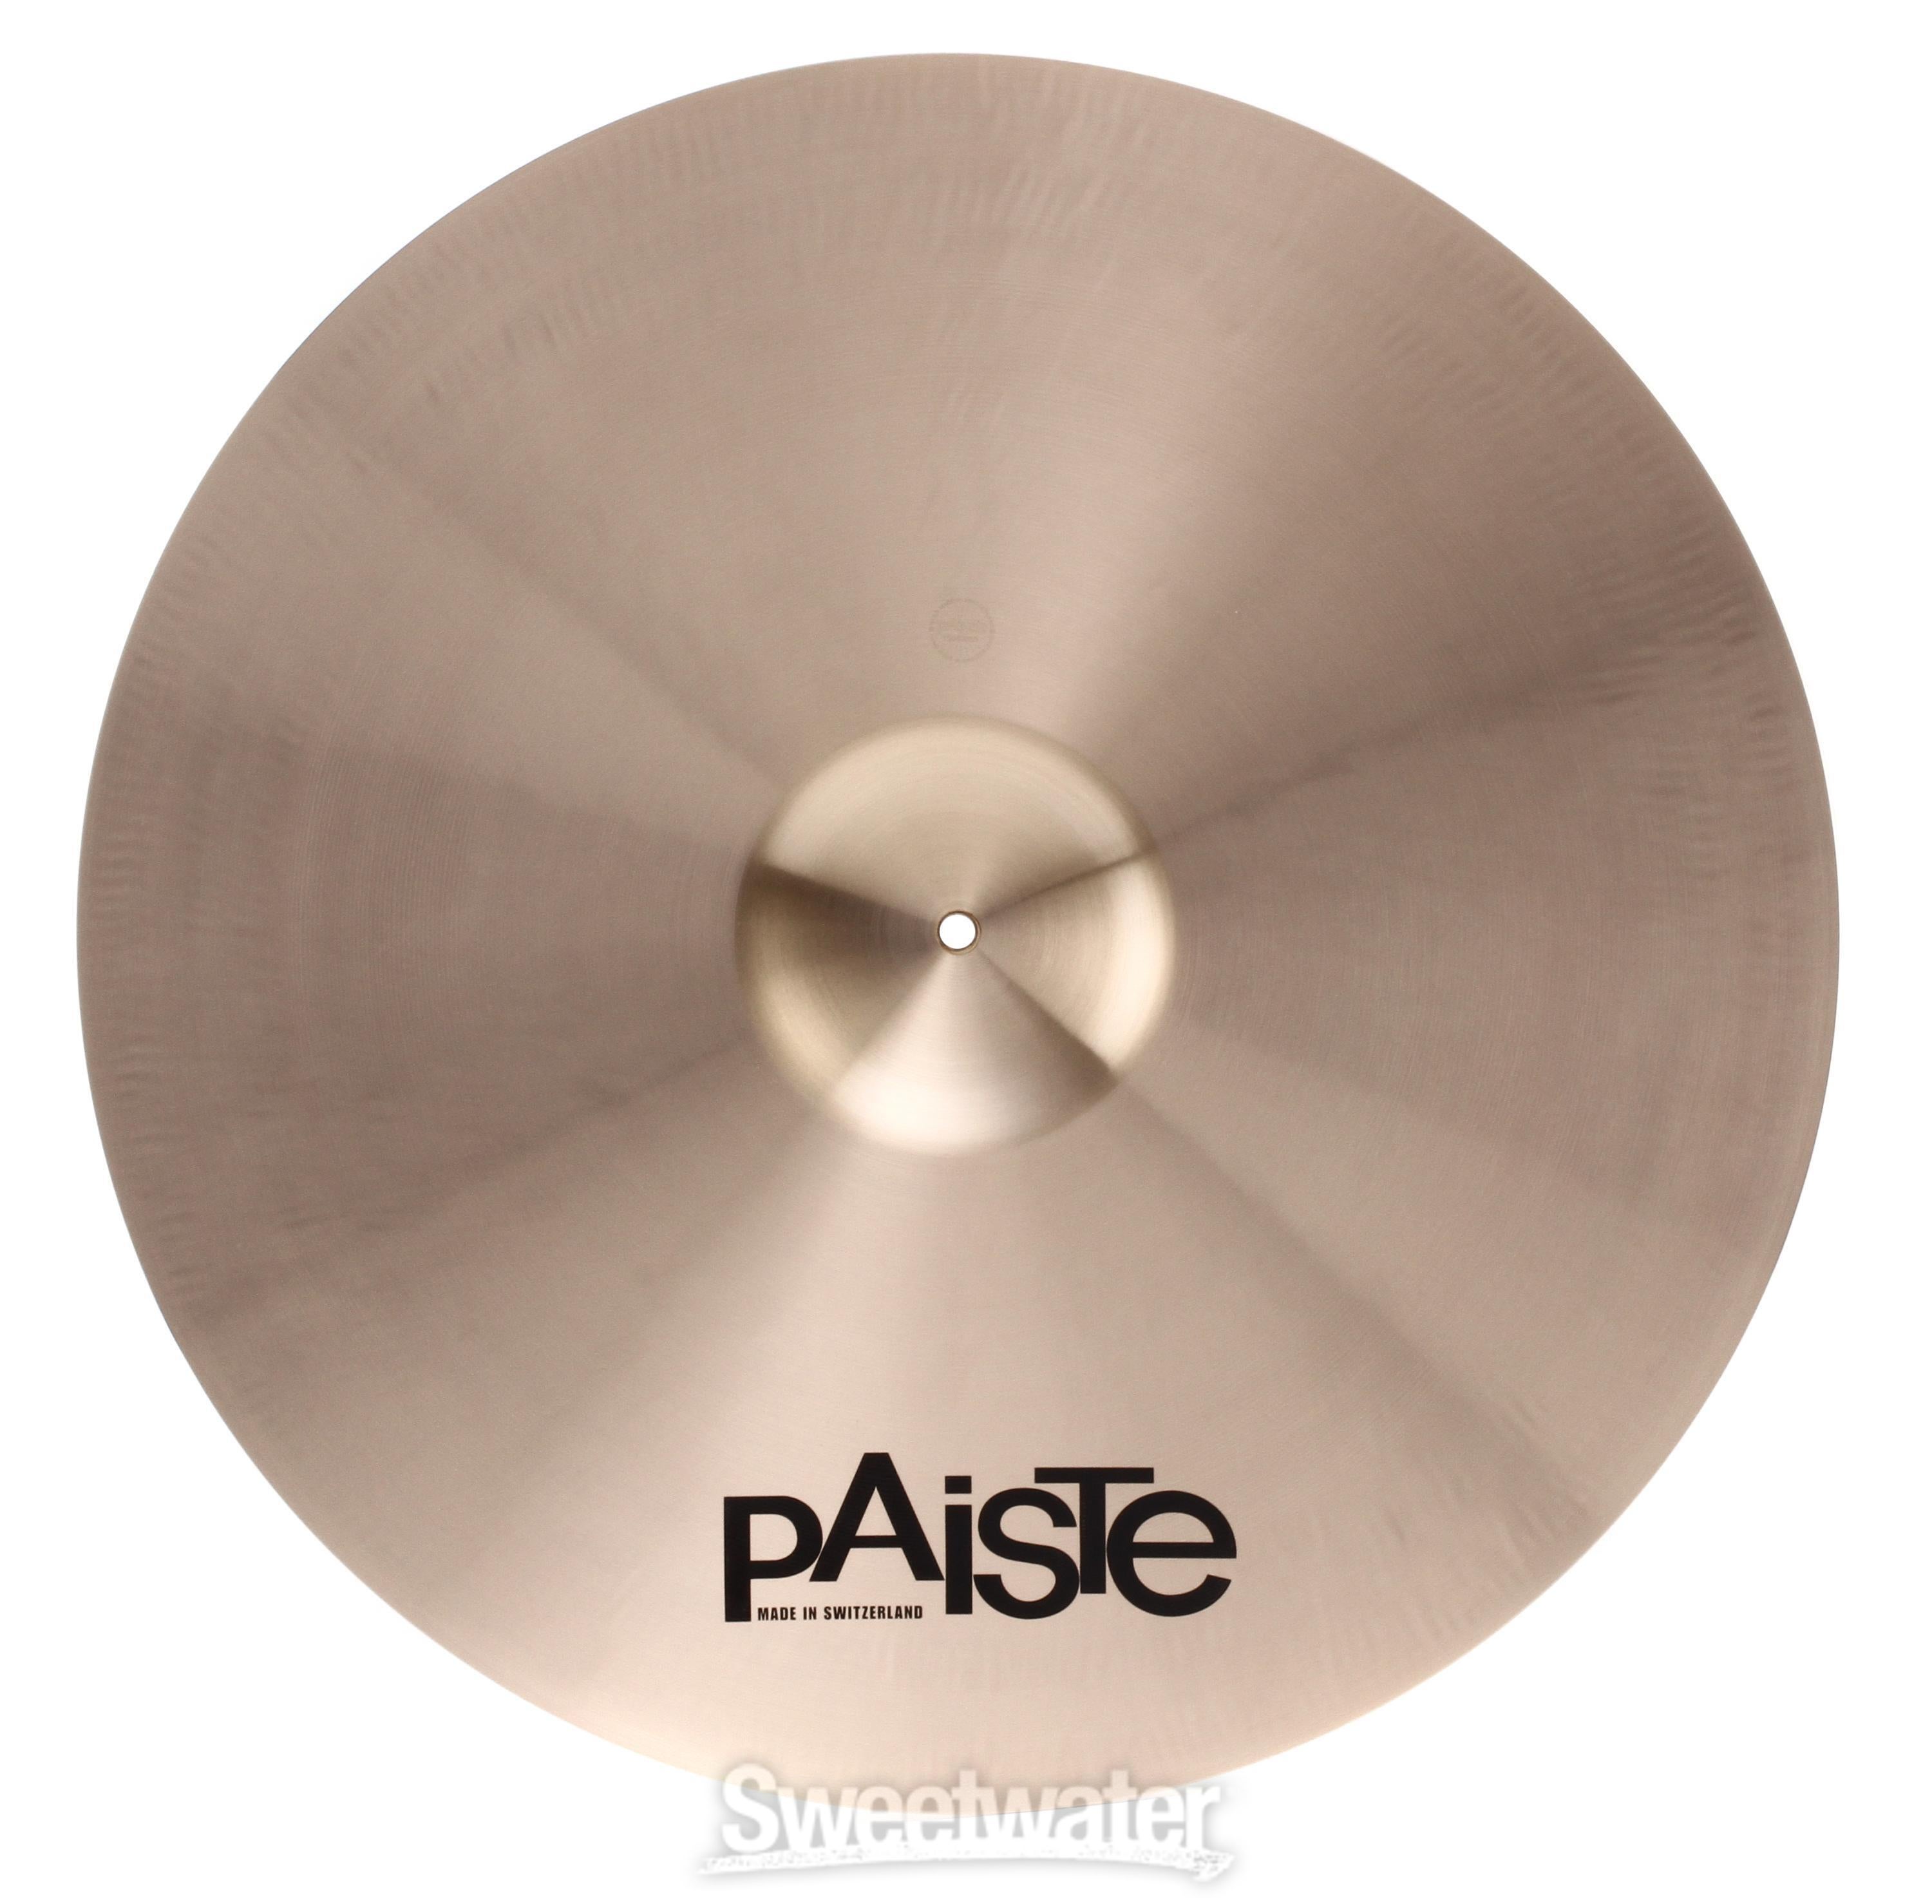 Paiste 24 inch Formula 602 Modern Essentials Ride Cymbal | Sweetwater